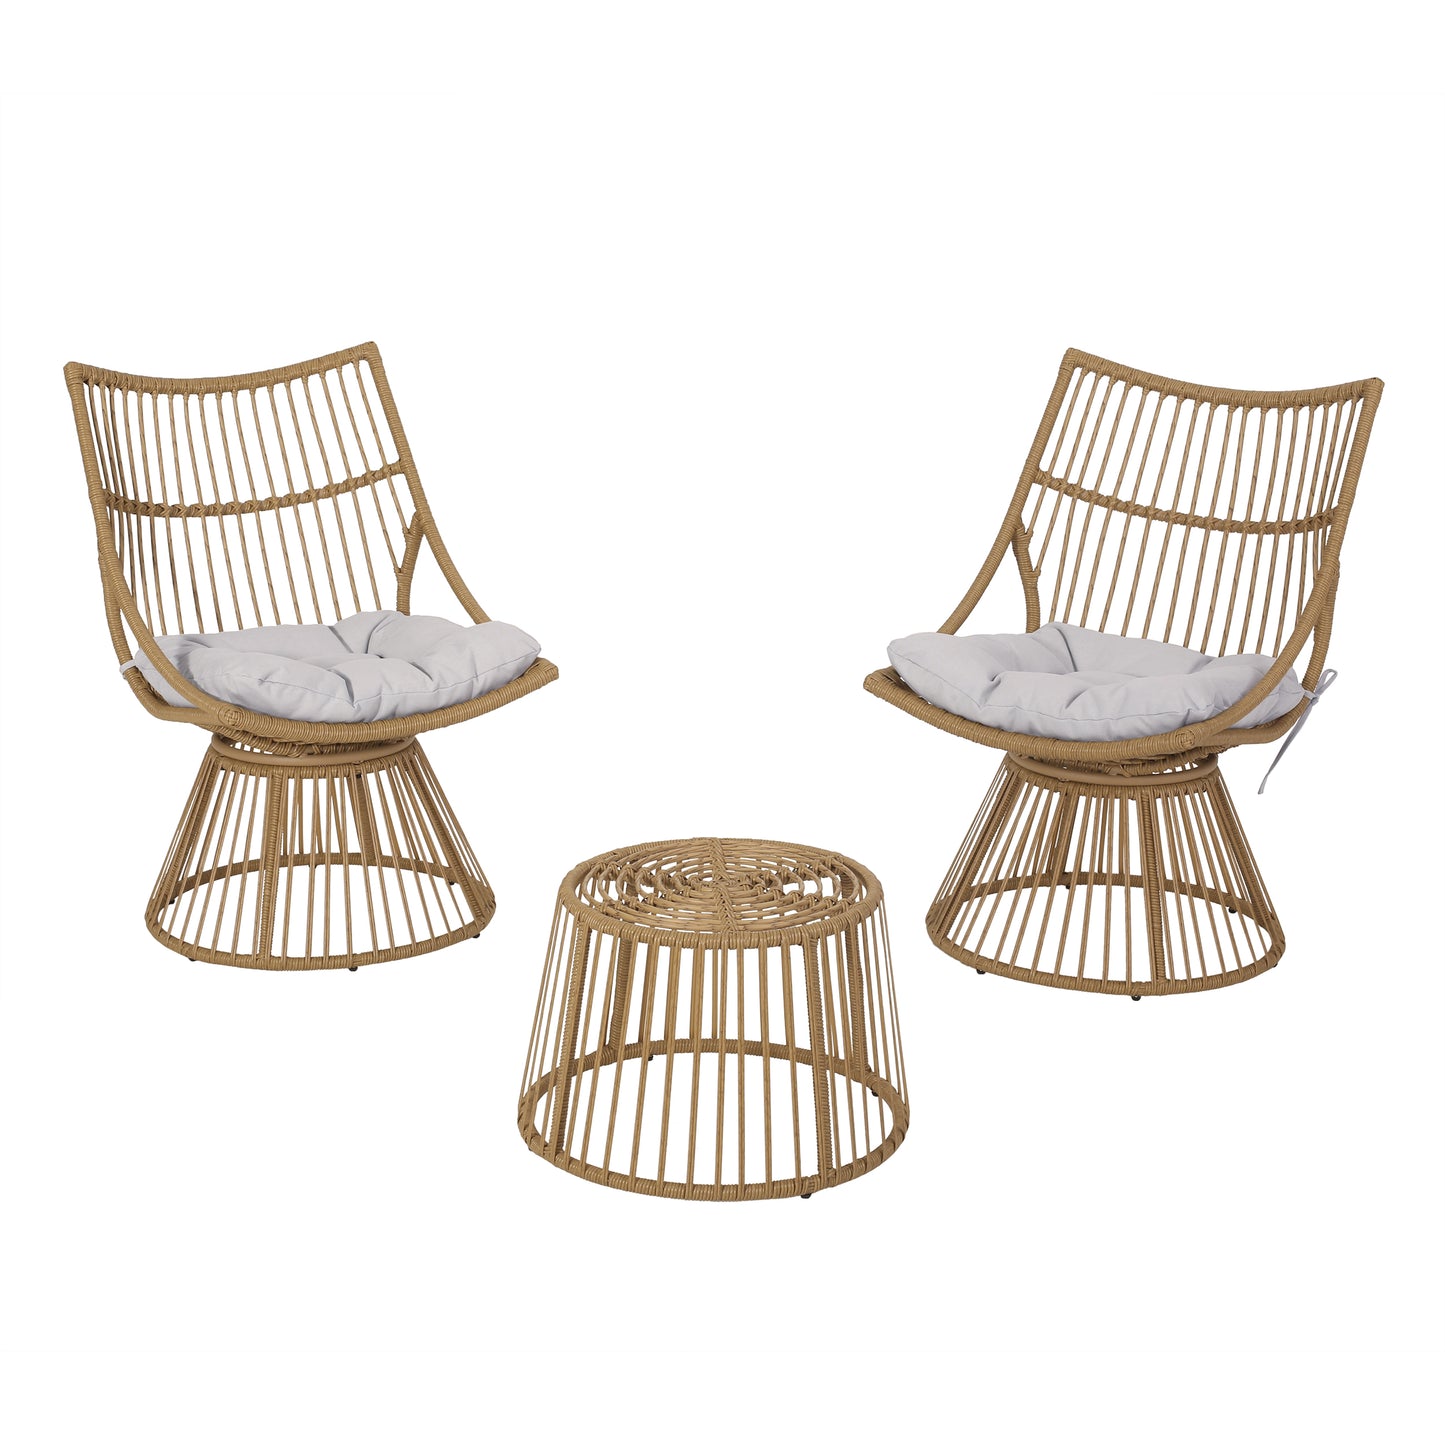 Apulia Outdoor Wicker 2 Seater Chat Set with Cushion, Light Brown and Beige